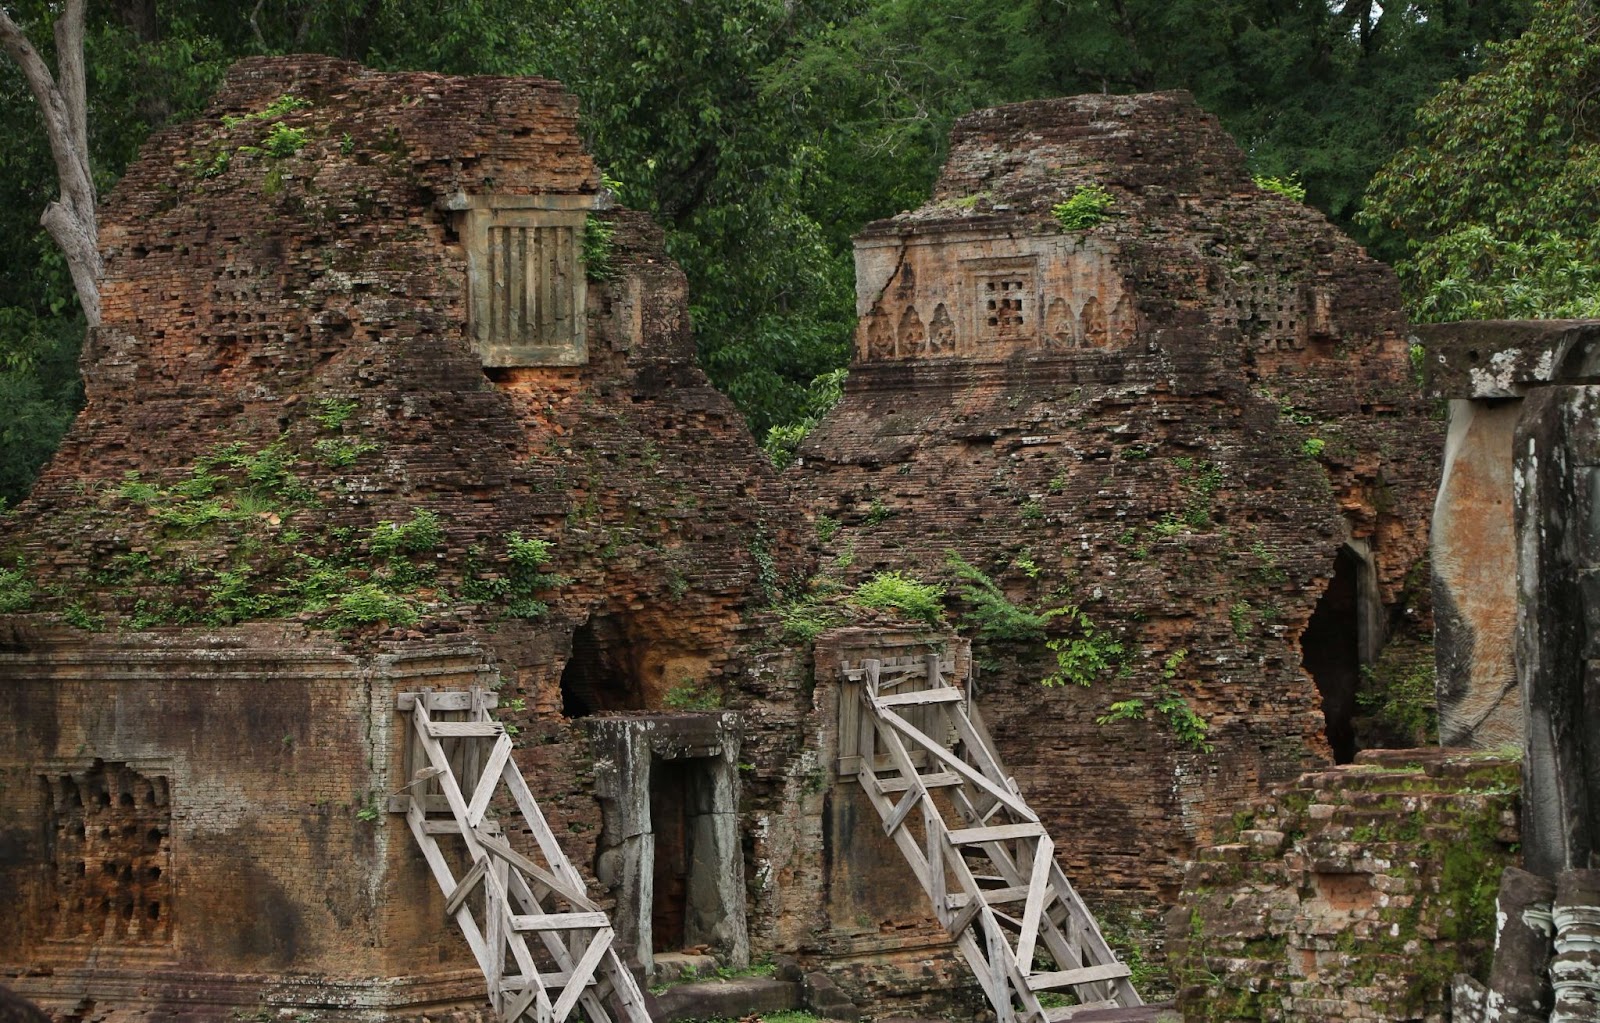 This is two of the four brick temples of Lolei at the Roluos group of temples.